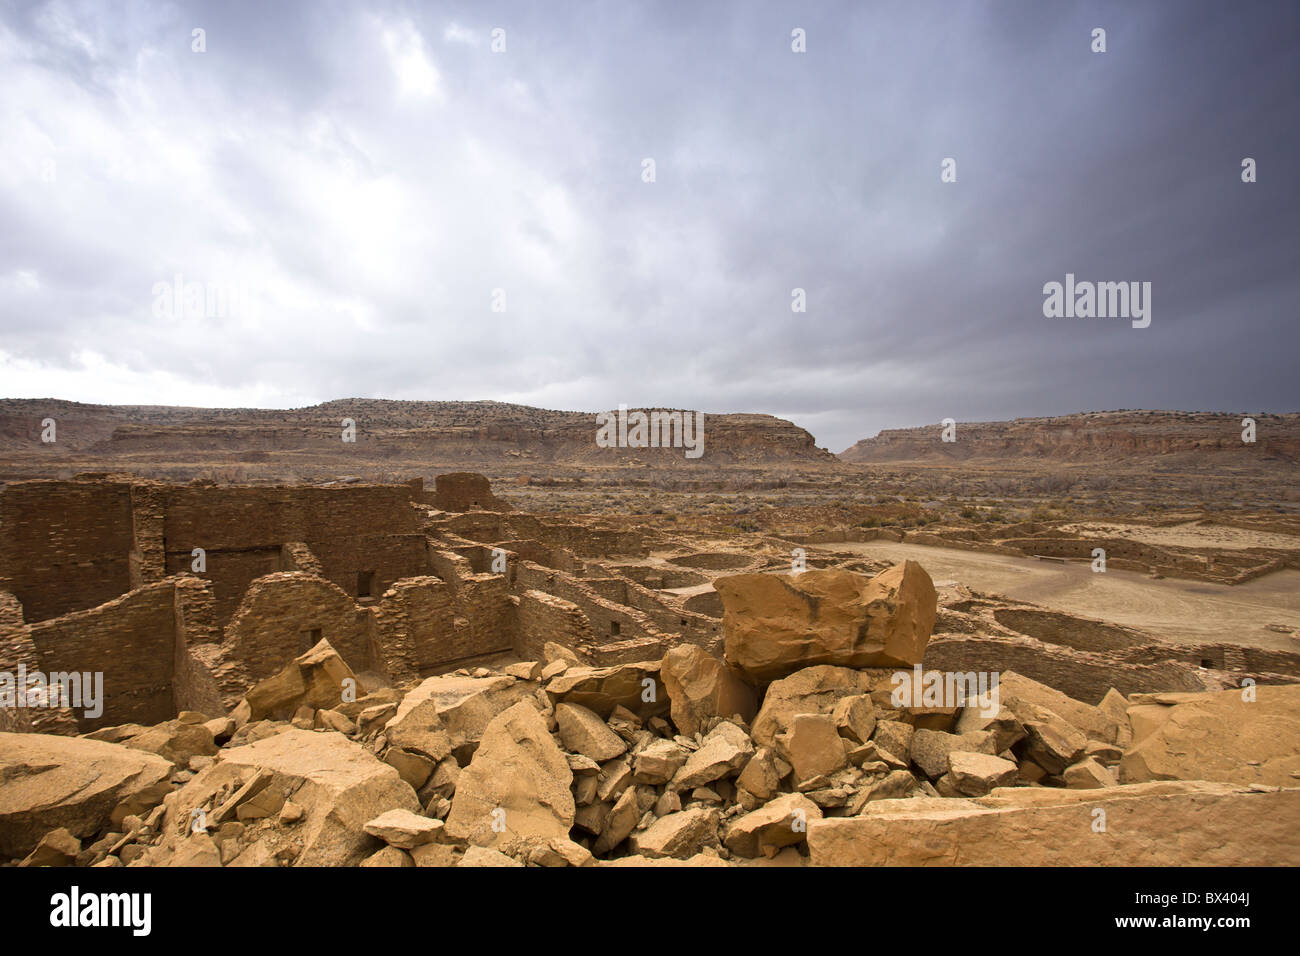 Looking across Chaco Canyon from Pueblo Bonito a Chacoan Great House in Chaco Culture National Historic Park, New Mexico USA. Stock Photo